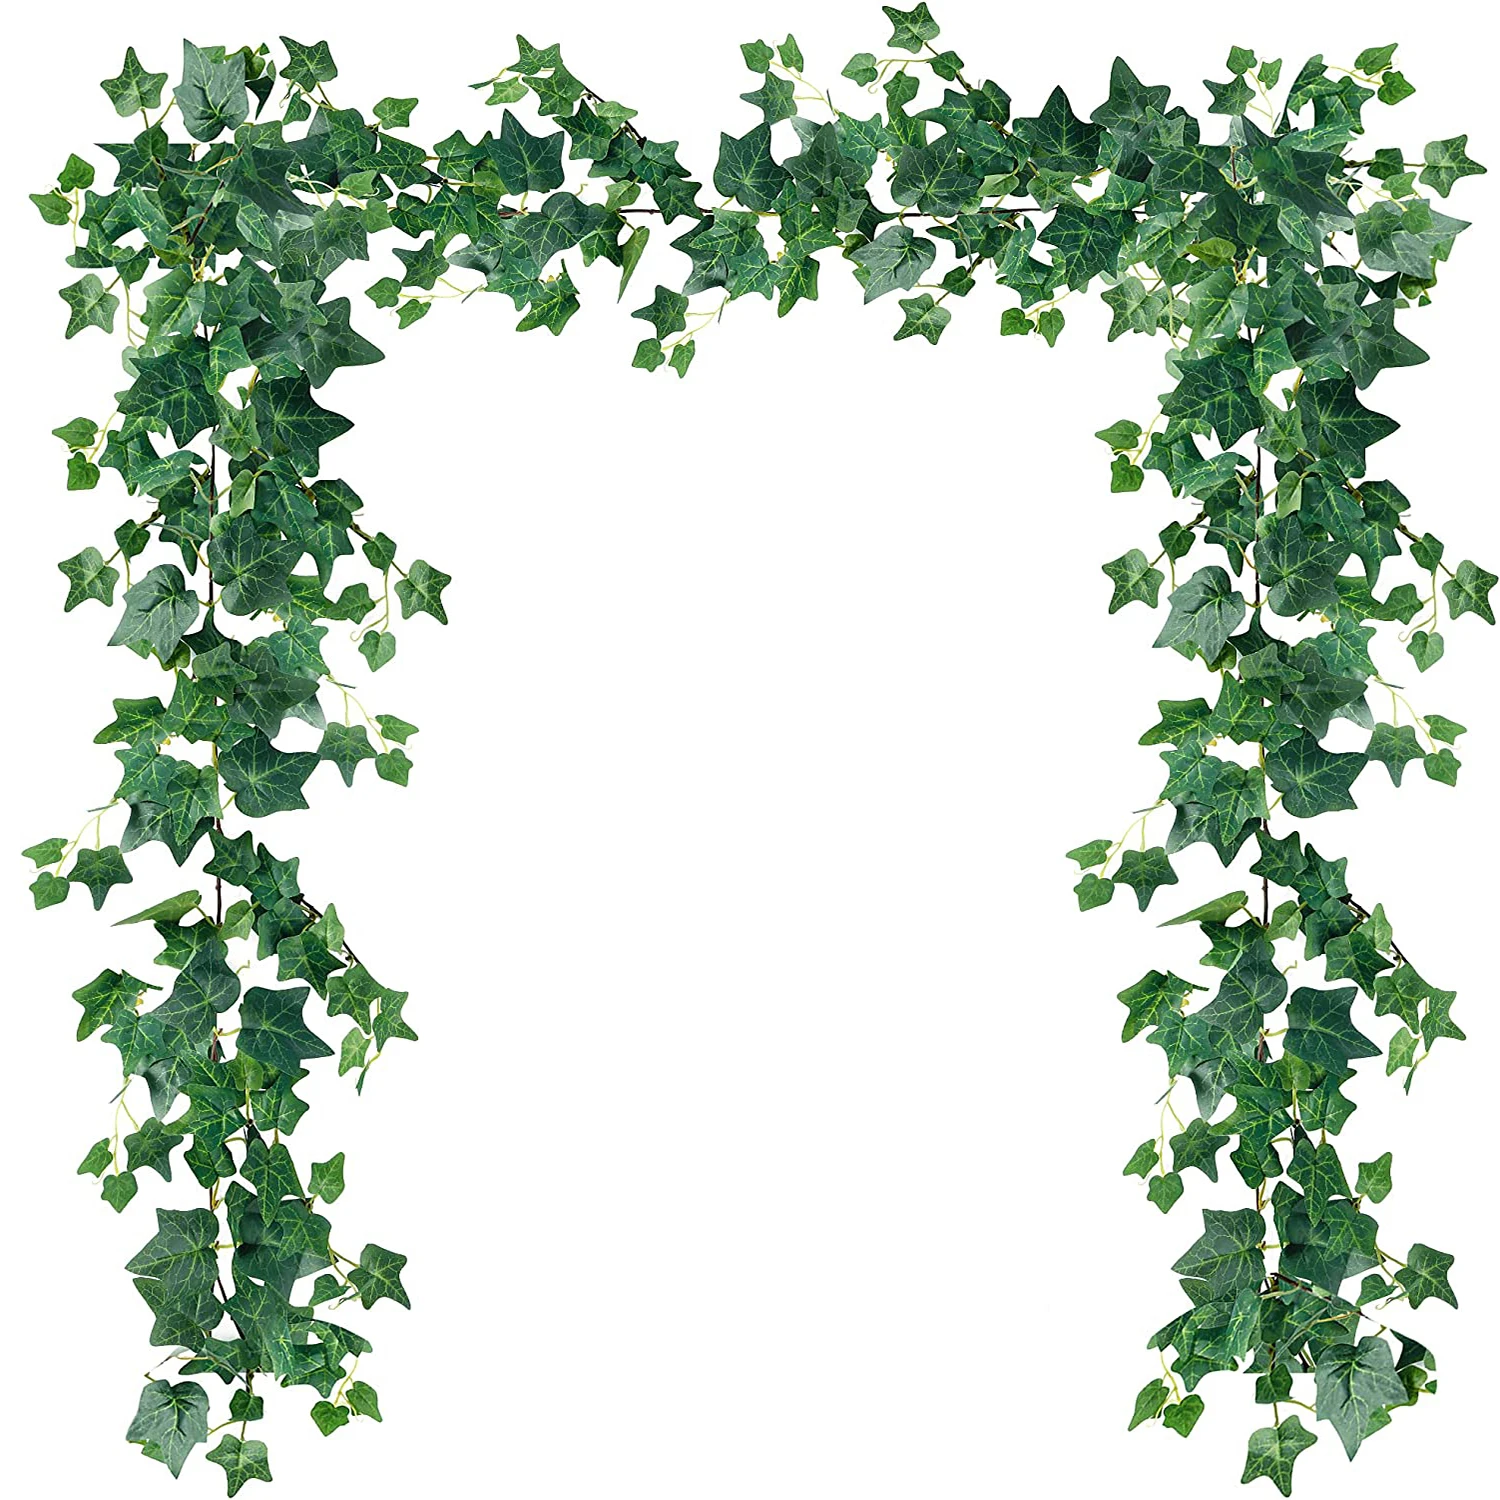 

Yannew 1.8M Silk Artificial Ivy Vines Wall Creeper Hanging Ivy Garland Greenery Leaves Fake Plants for Wall Indoor Wedding Decor